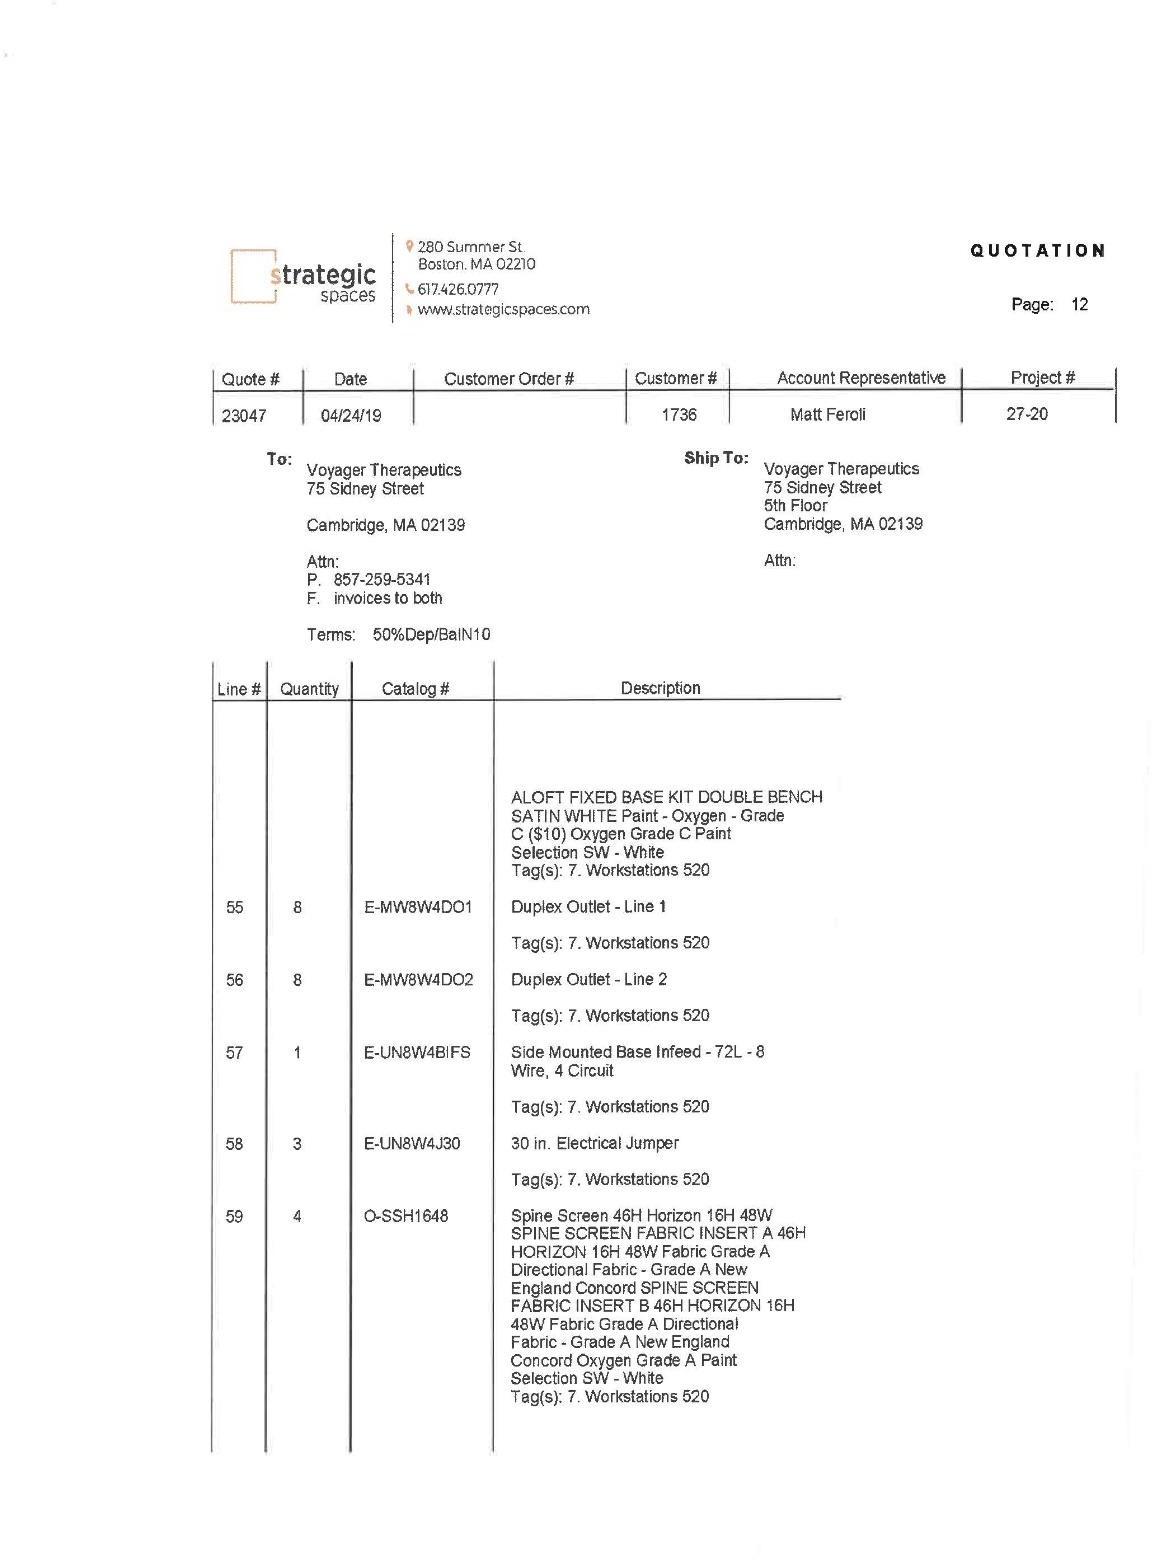 Ex C to Voyager BioNTech Sublease Agreement_Page_12